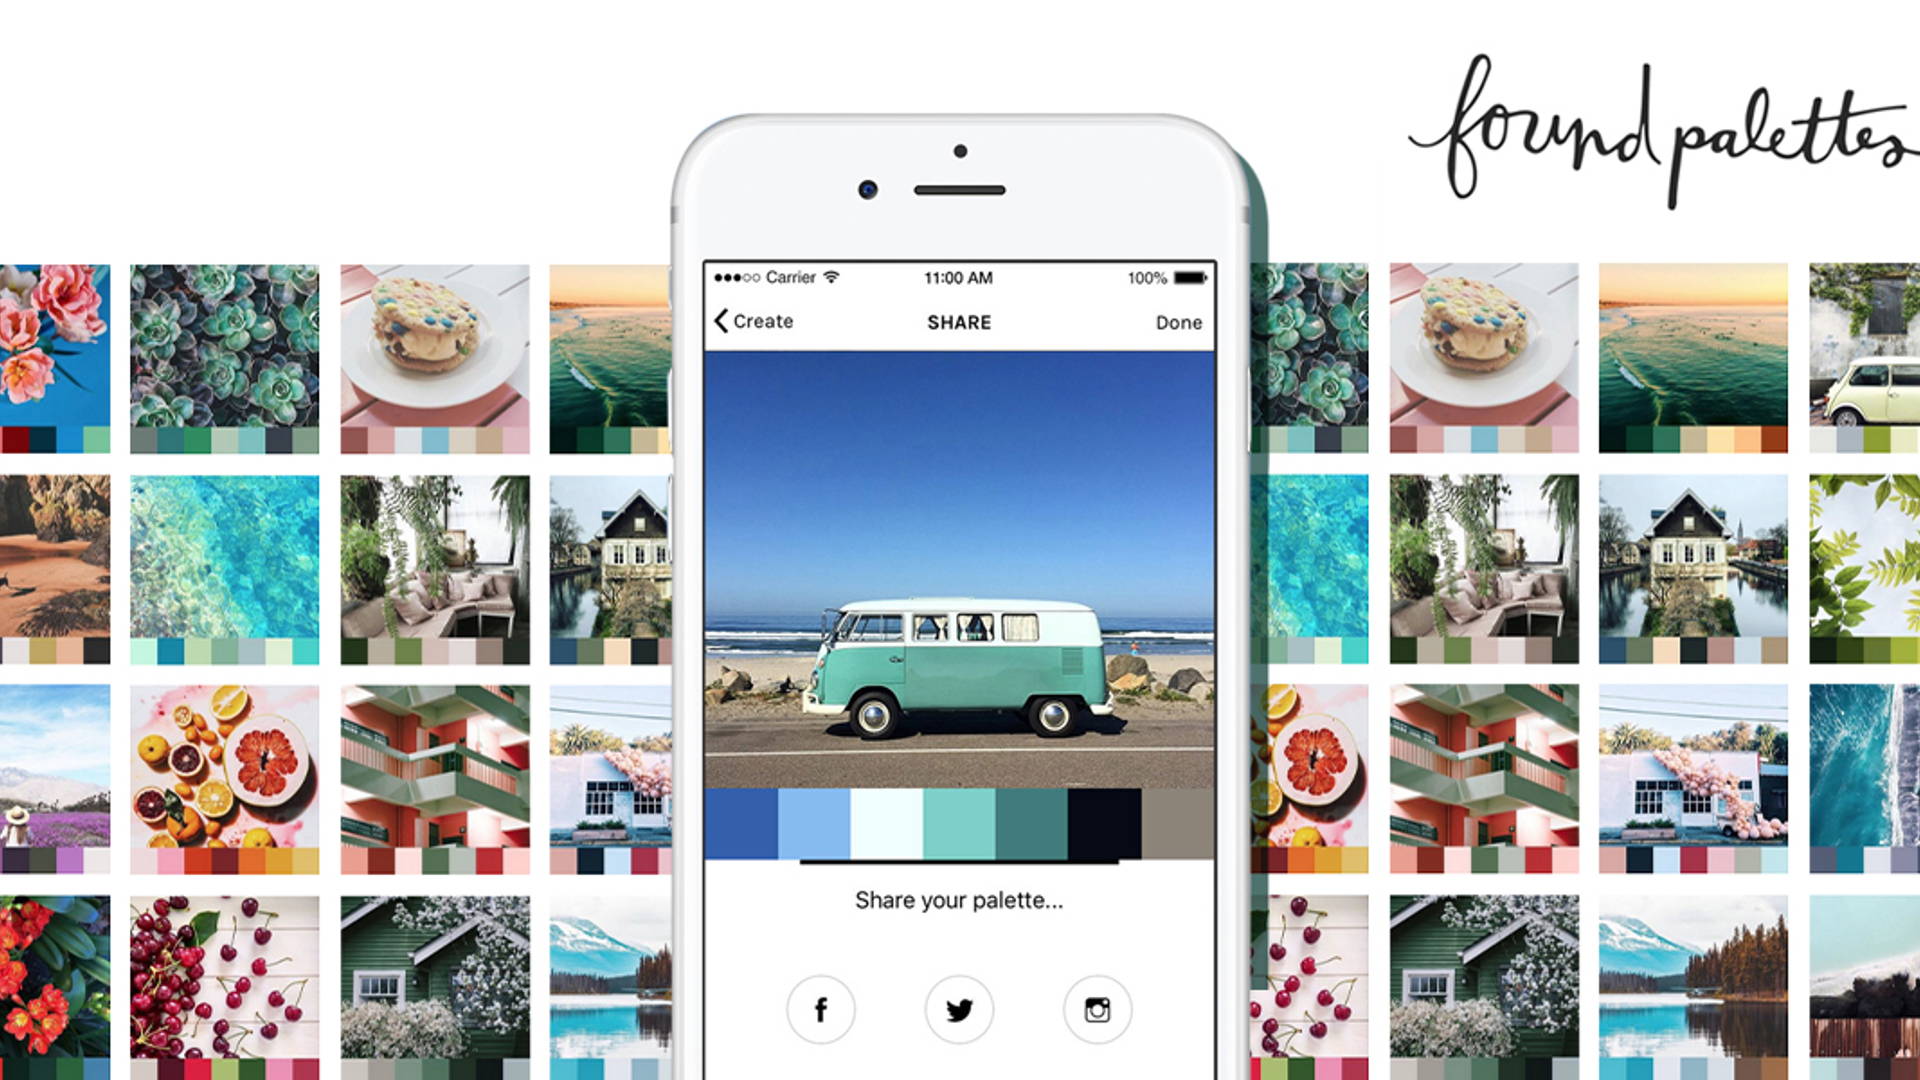 Featured image for Found Palettes - How to build an App you didn’t even know you needed.